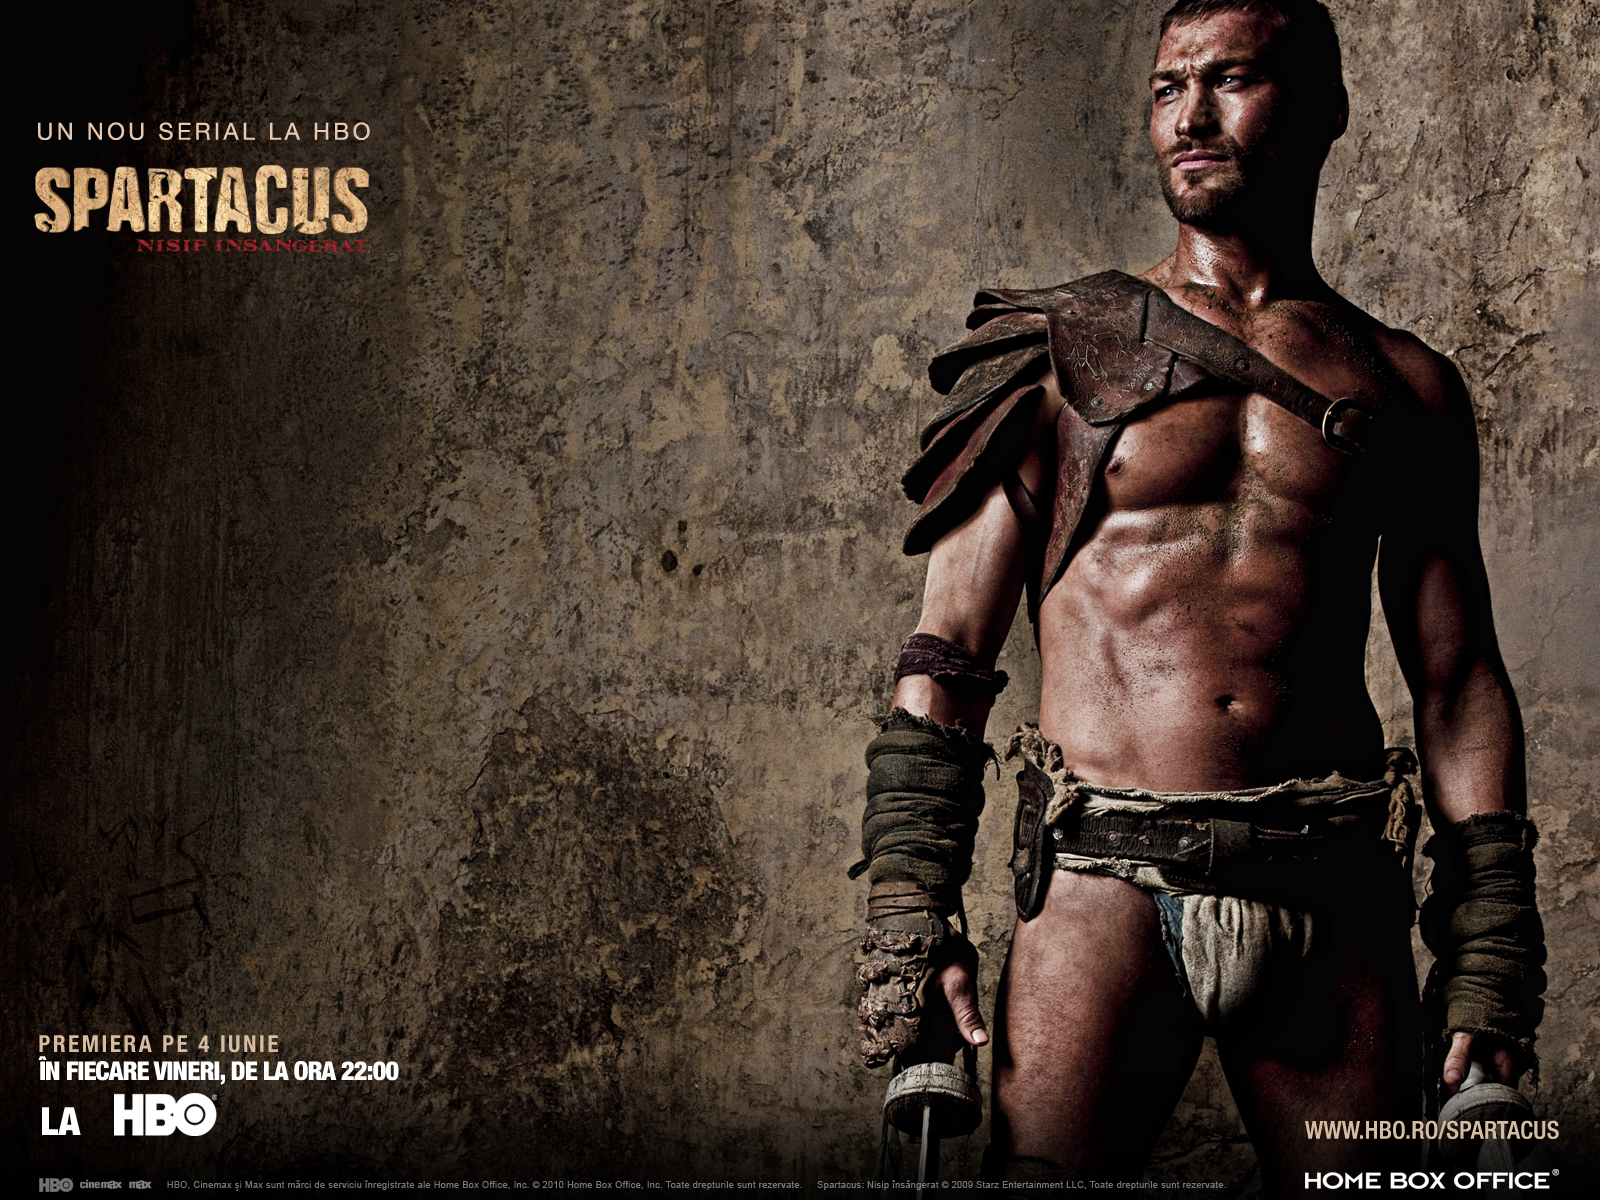 Wallpapers Spartacus Extra Hbo Rom Nia 1600x1200 #spartacus